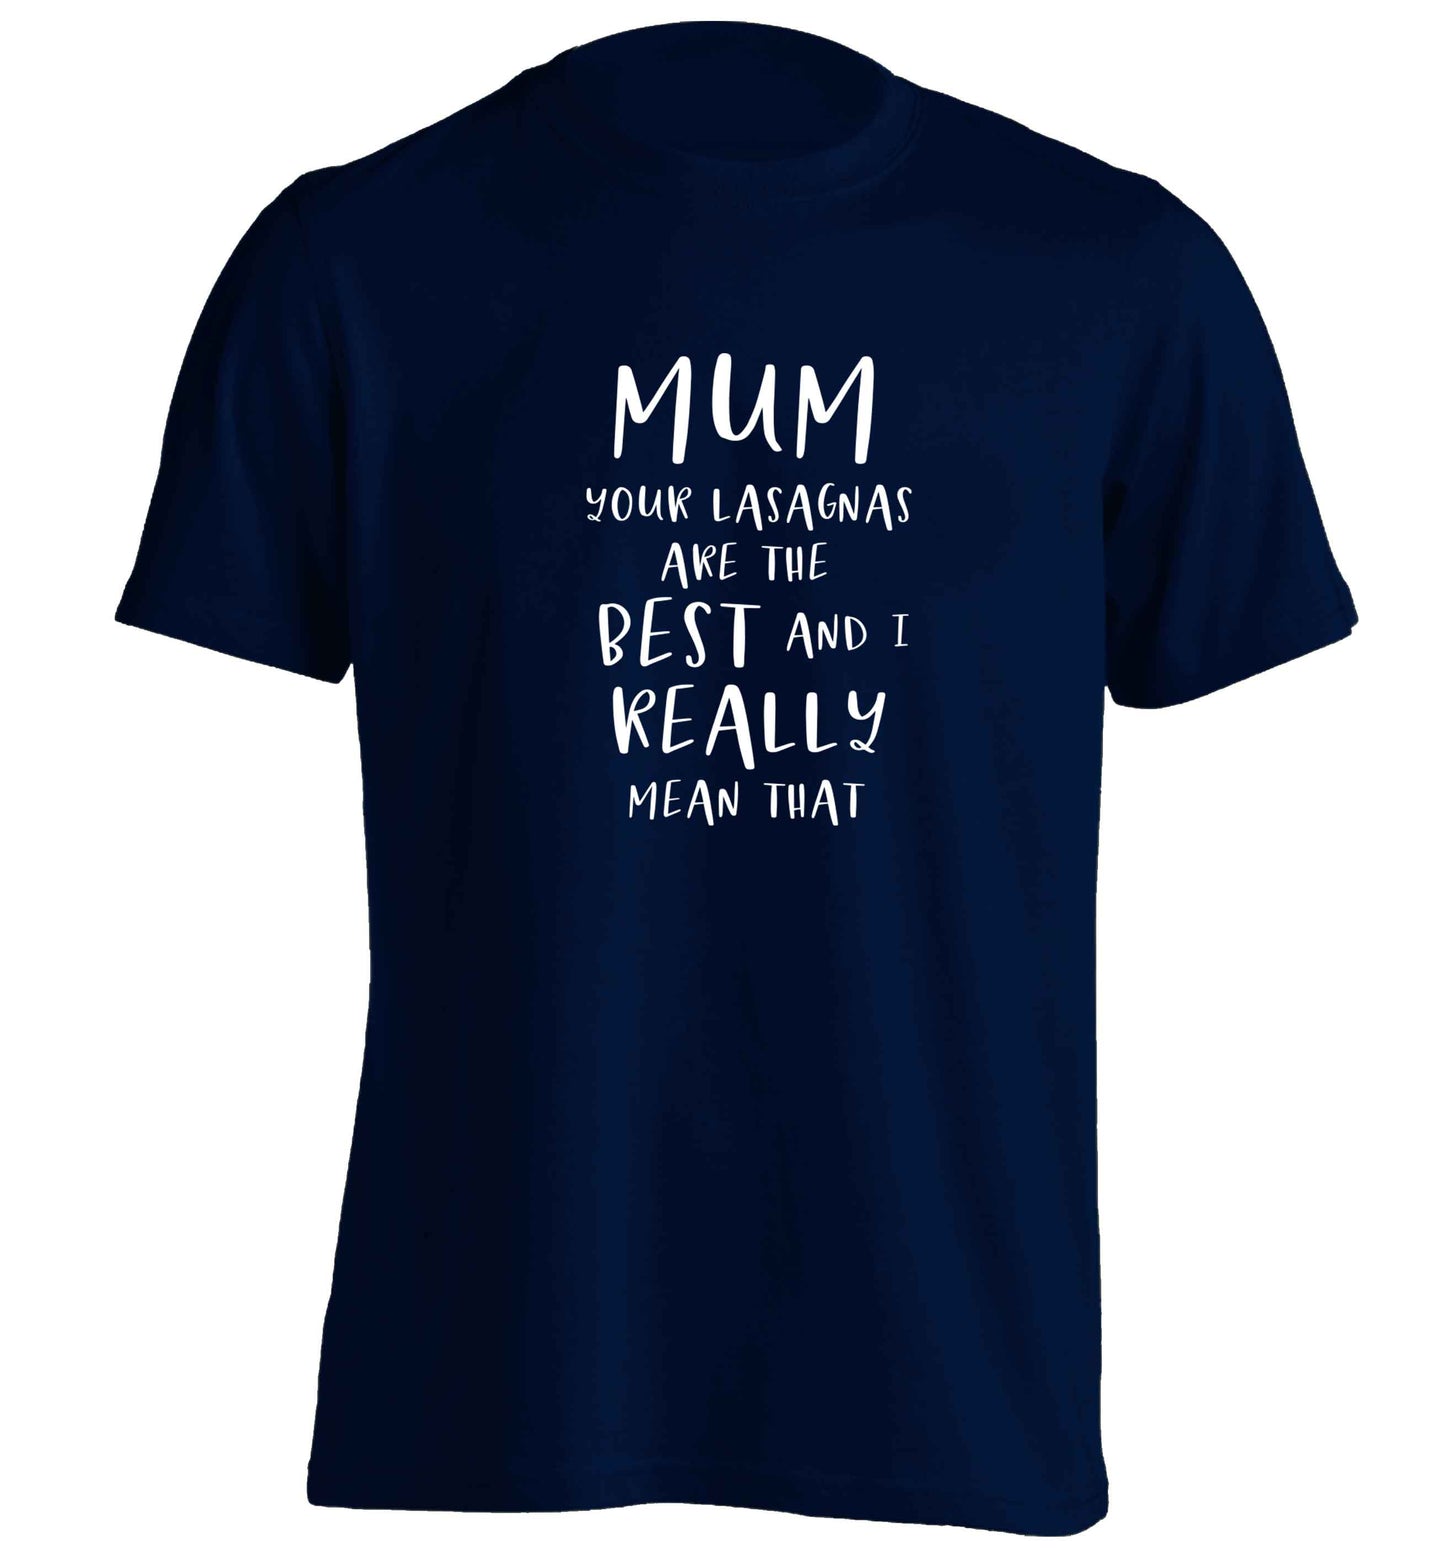 Funny gifts for your mum on mother's dayor her birthday! Mum your lasagnas are the best and I really mean that adults unisex navy Tshirt 2XL